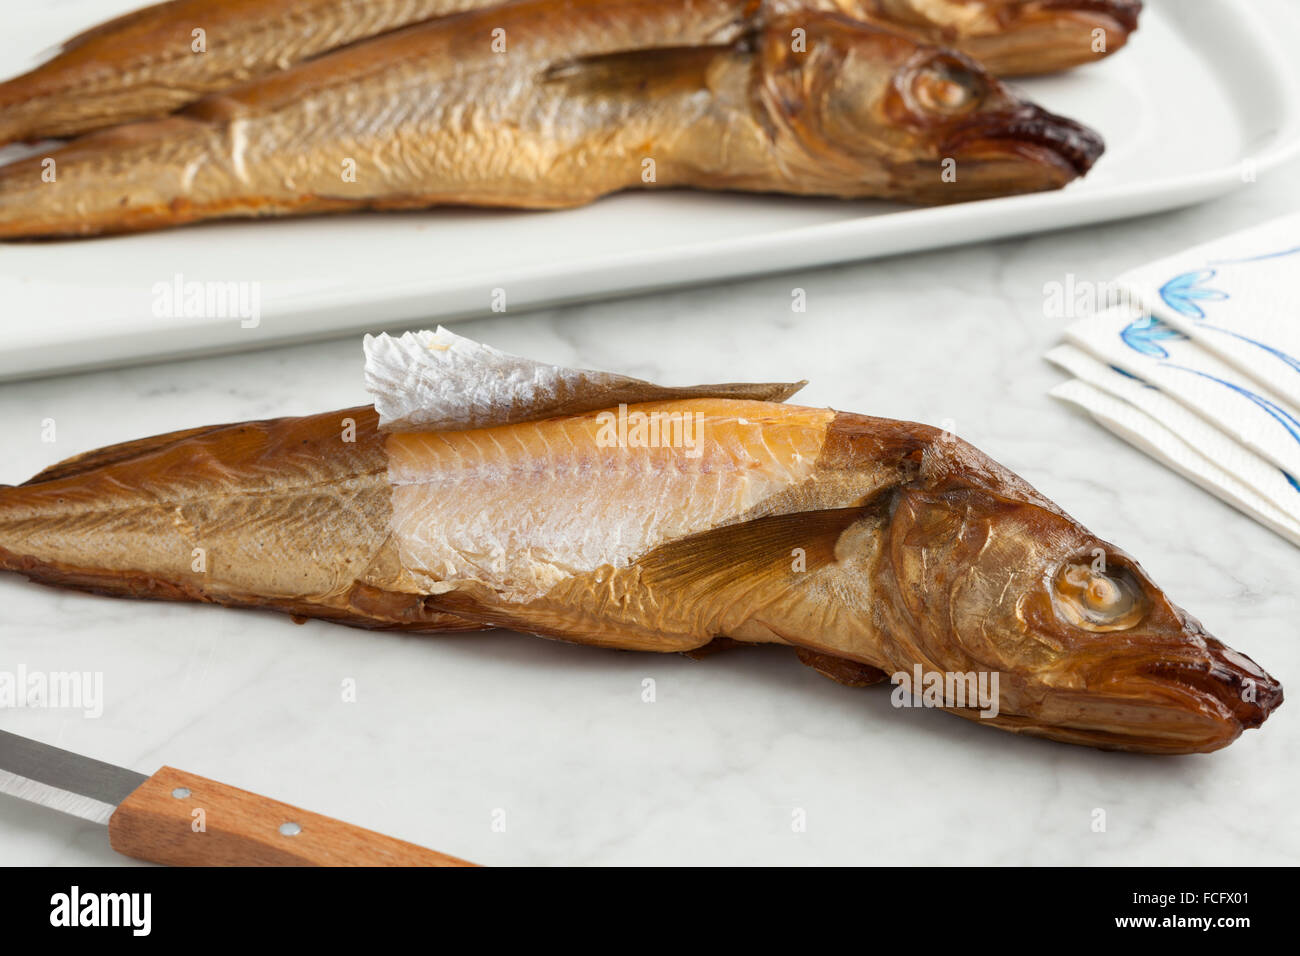 Fresh smoked whiting fish on the table Stock Photo